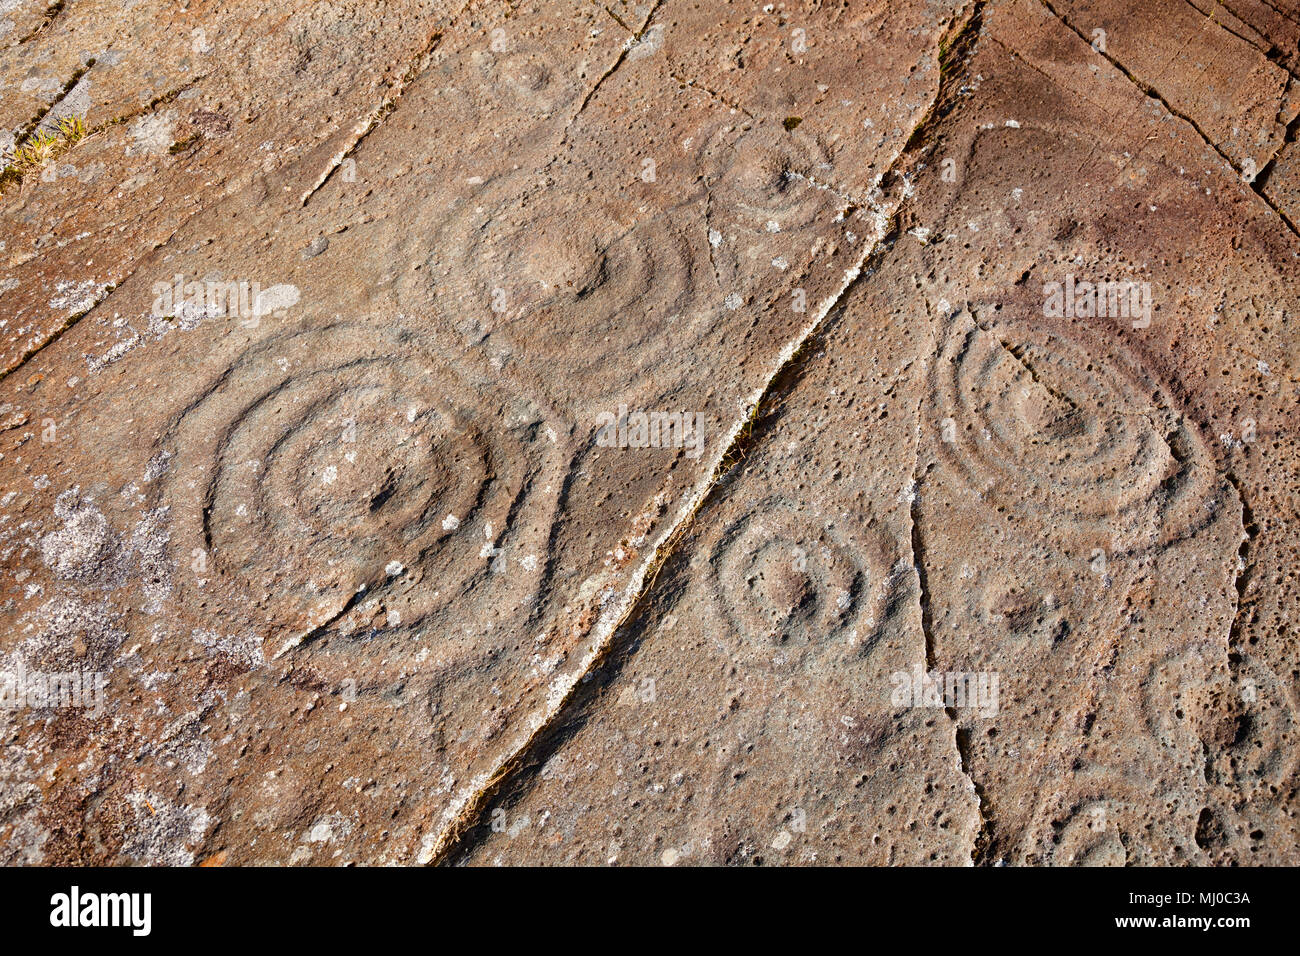 Cup and rings marks on a stone dating from the Iron Age at Cairnbaan prehistoric site, Argyll and Bute, Scotland, UK Stock Photo